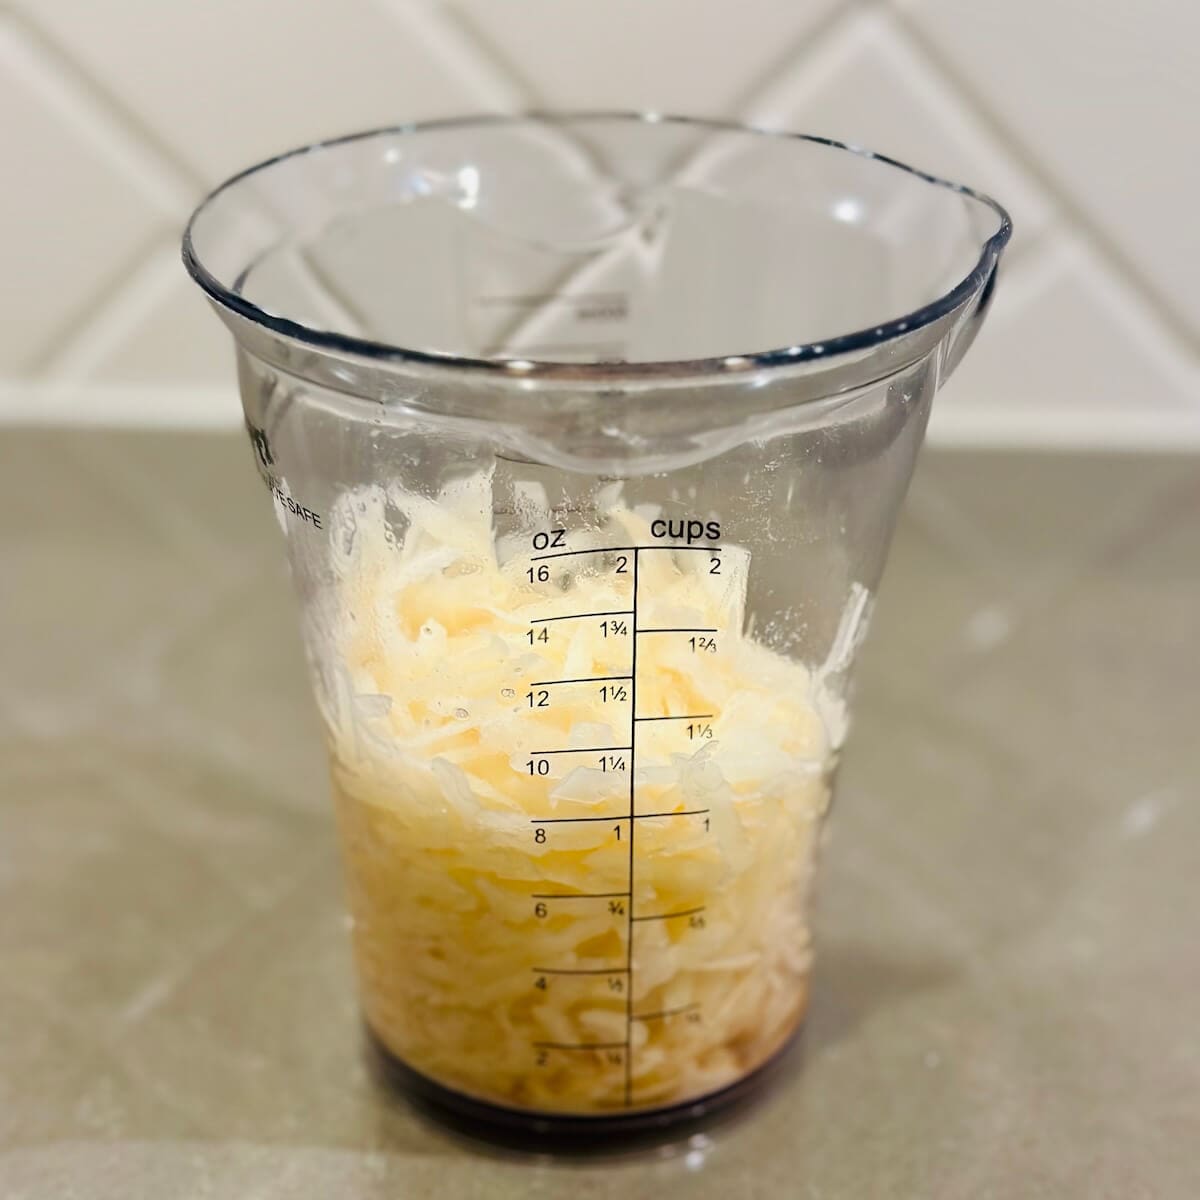 Grated potato in measuring cup